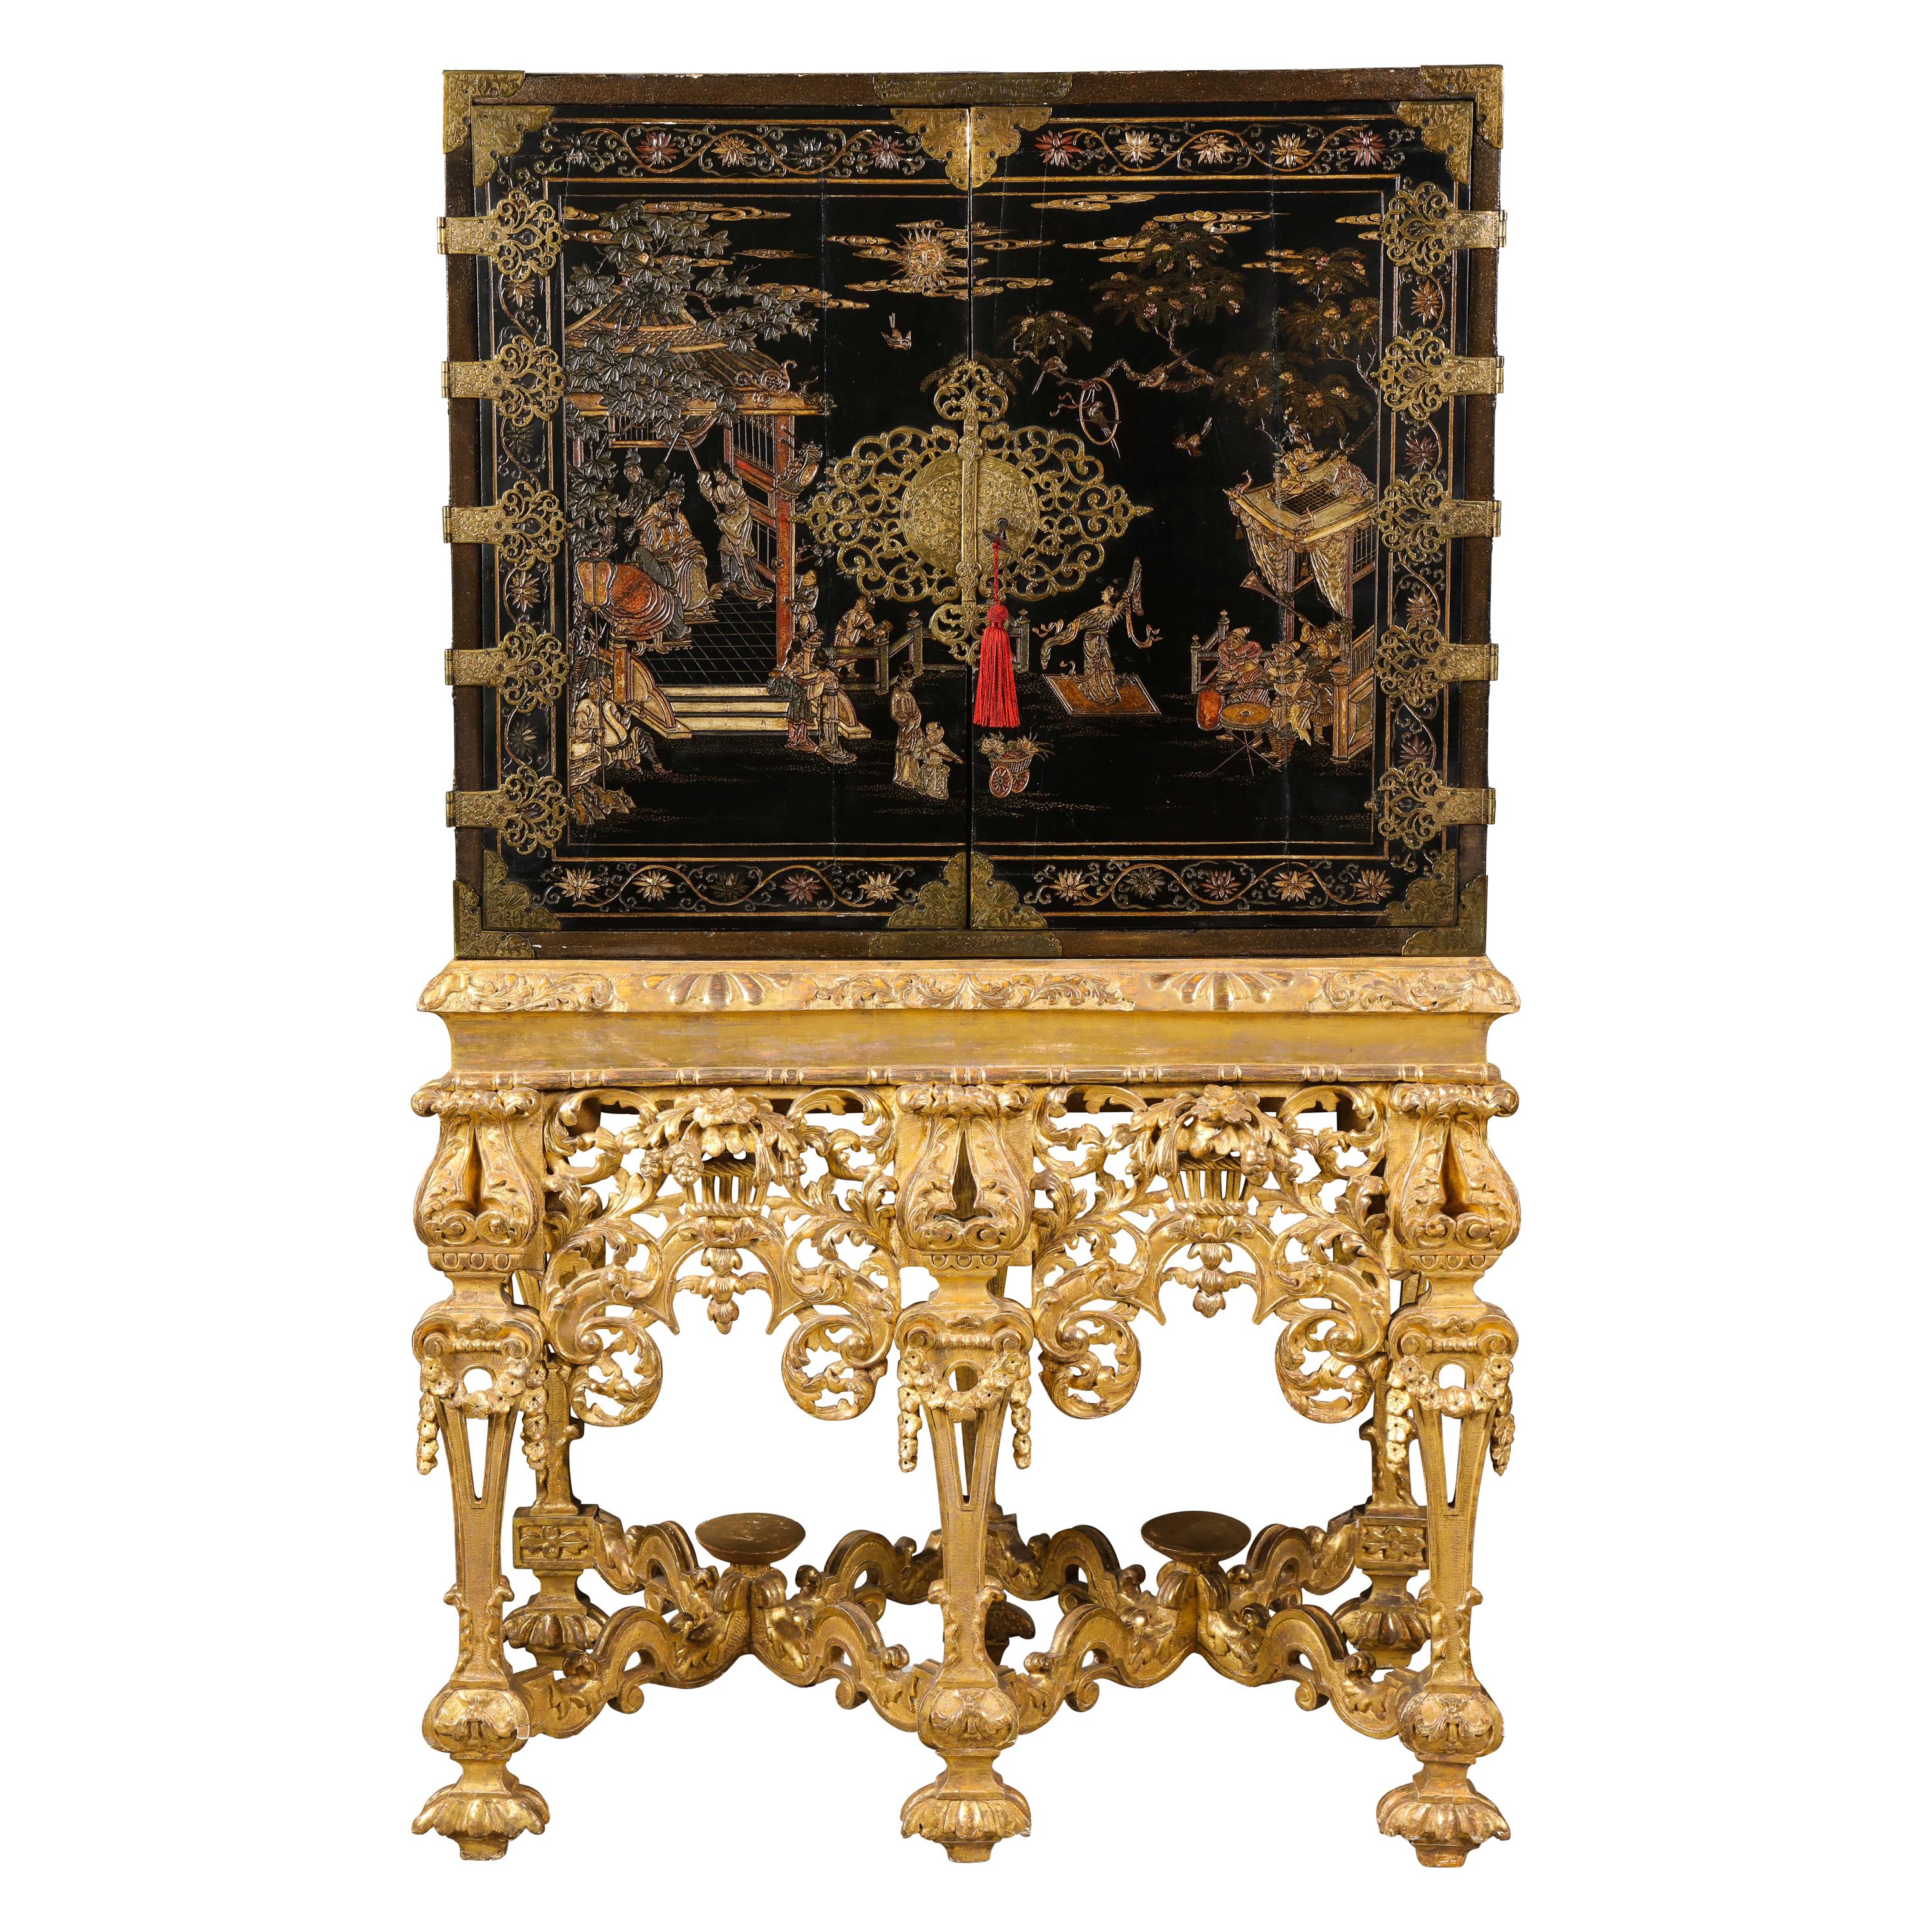 Chinese Brass-Mounted Coromandel Lacquer Cabinet on a Charles II, circa 1685